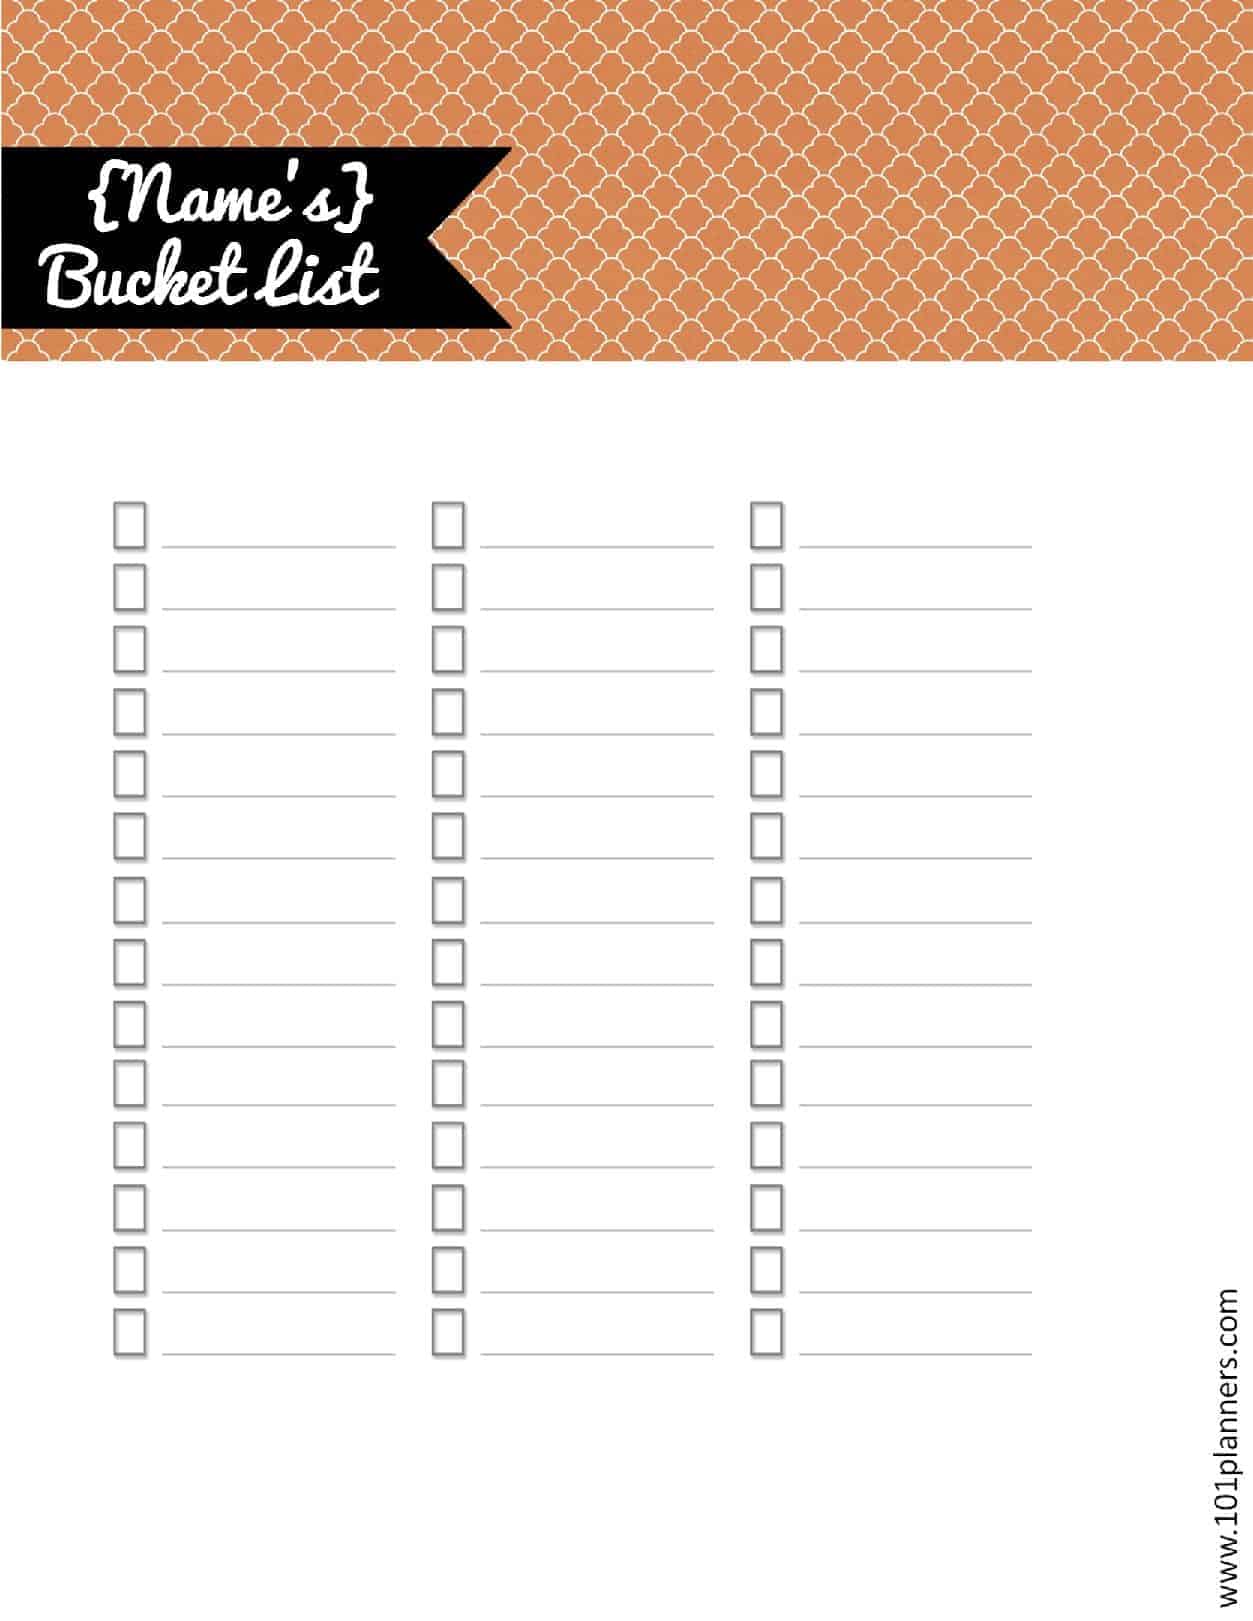 Free Bucket List Printable Customize Online & Print at Home